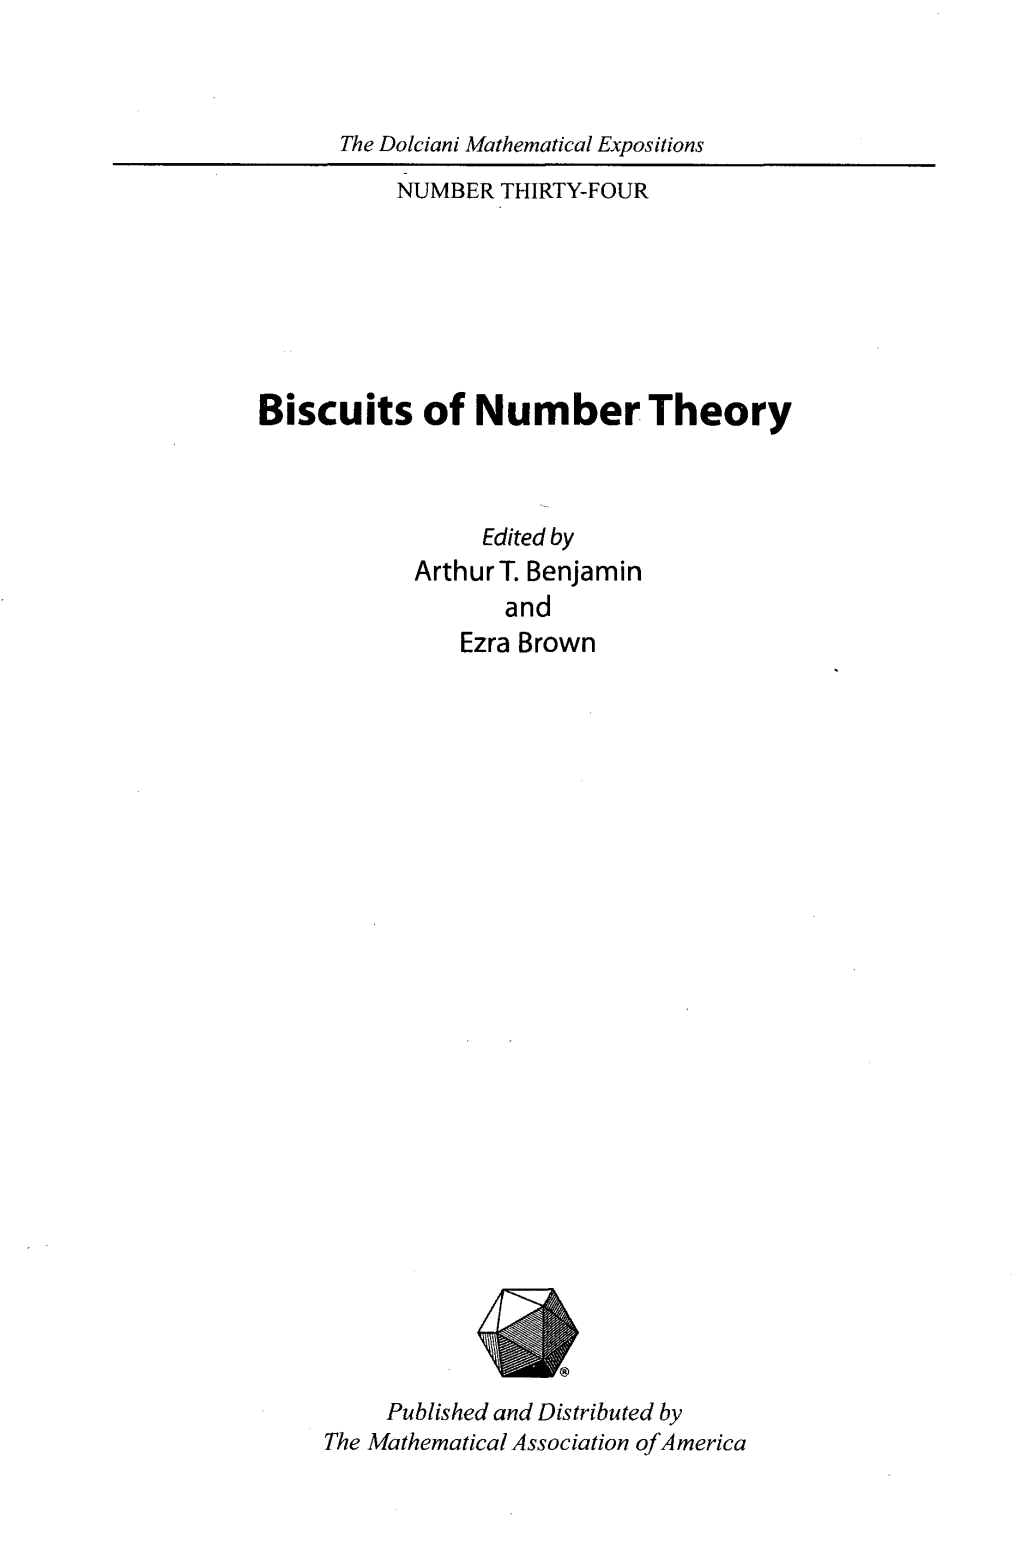 Biscuits of Number Theory